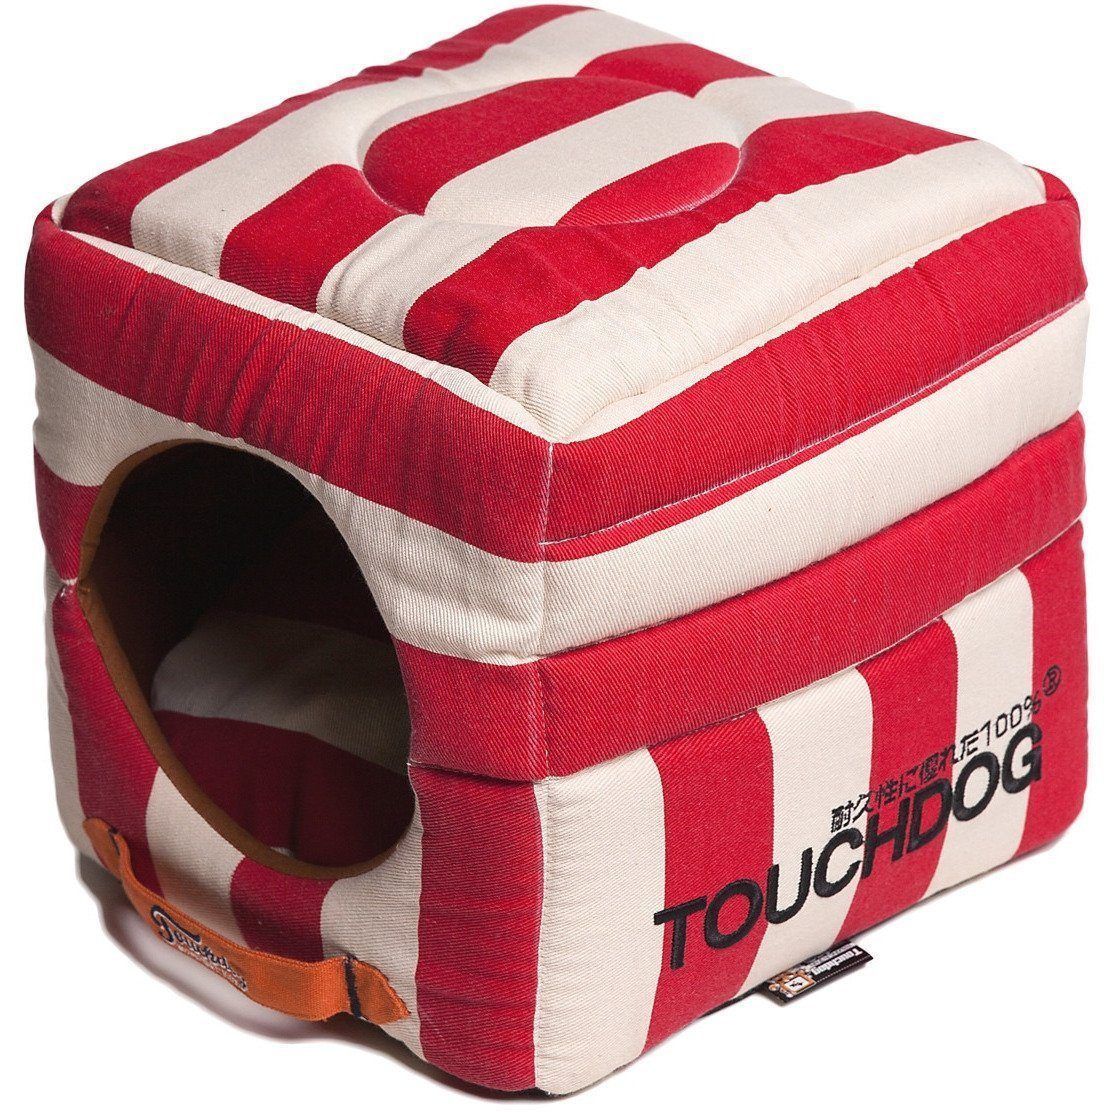 Touchdog ® 'Polo-Striped' 2-in-1 Convertible and Collapsible Dog and Cat Bed Red, White 